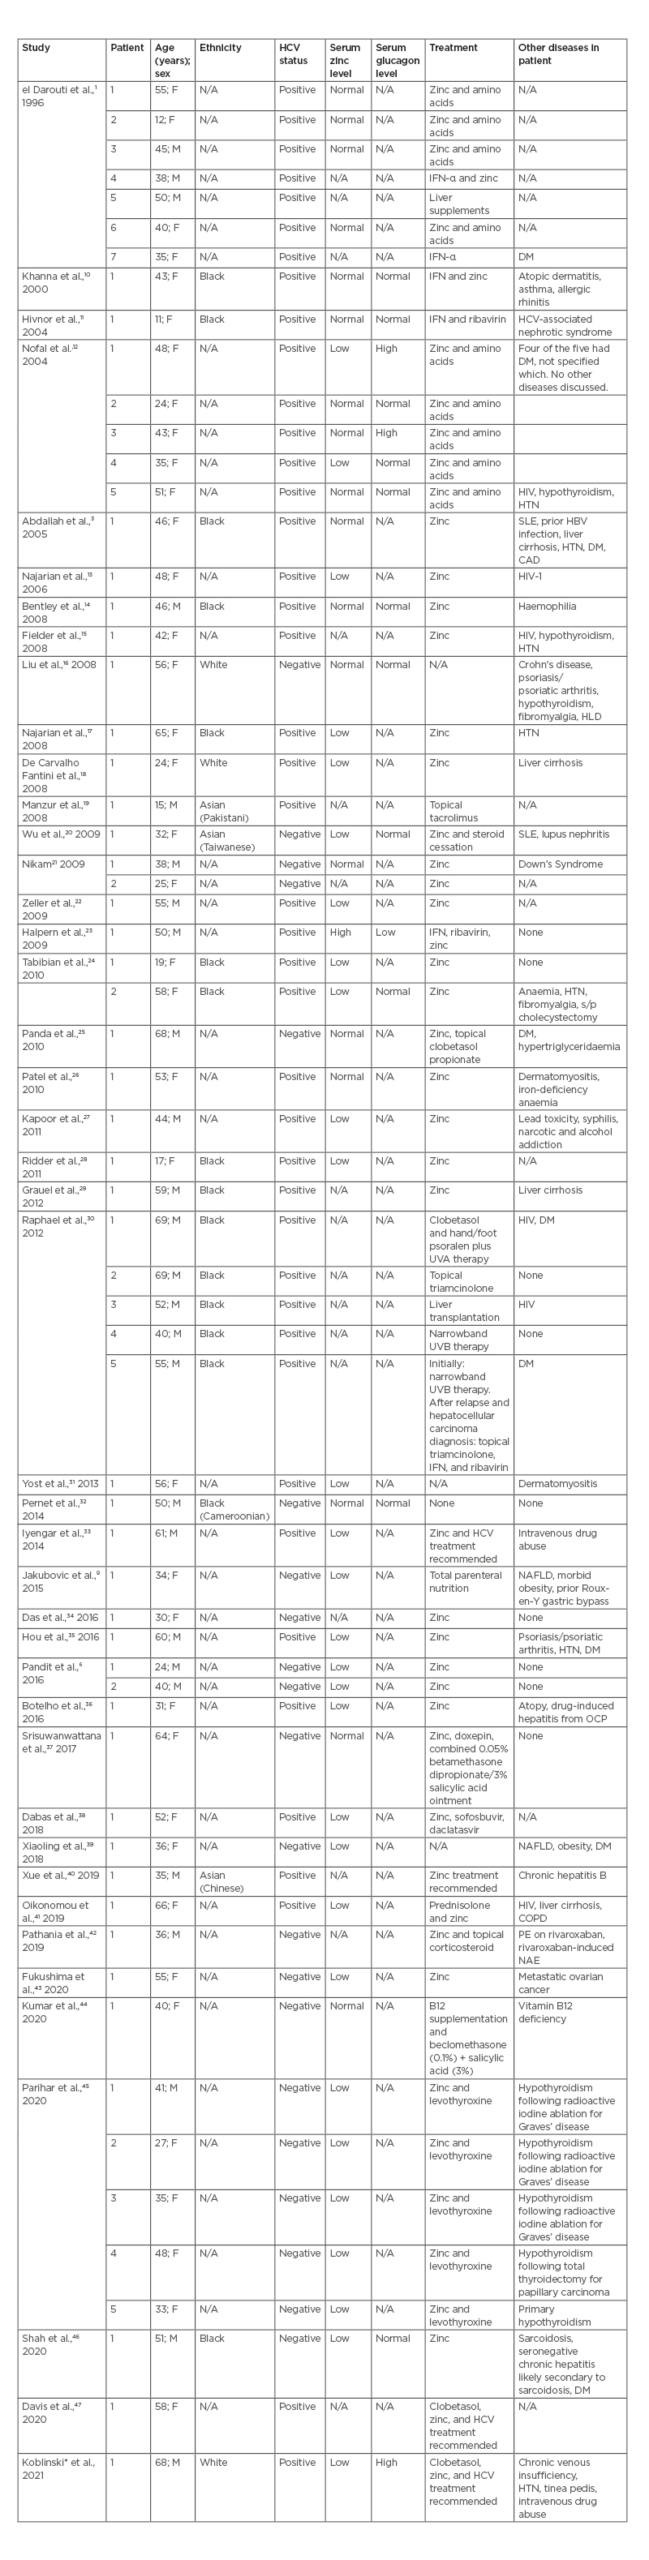 Table 1 PubMed-indexed cases of necrolytic acral erythema.